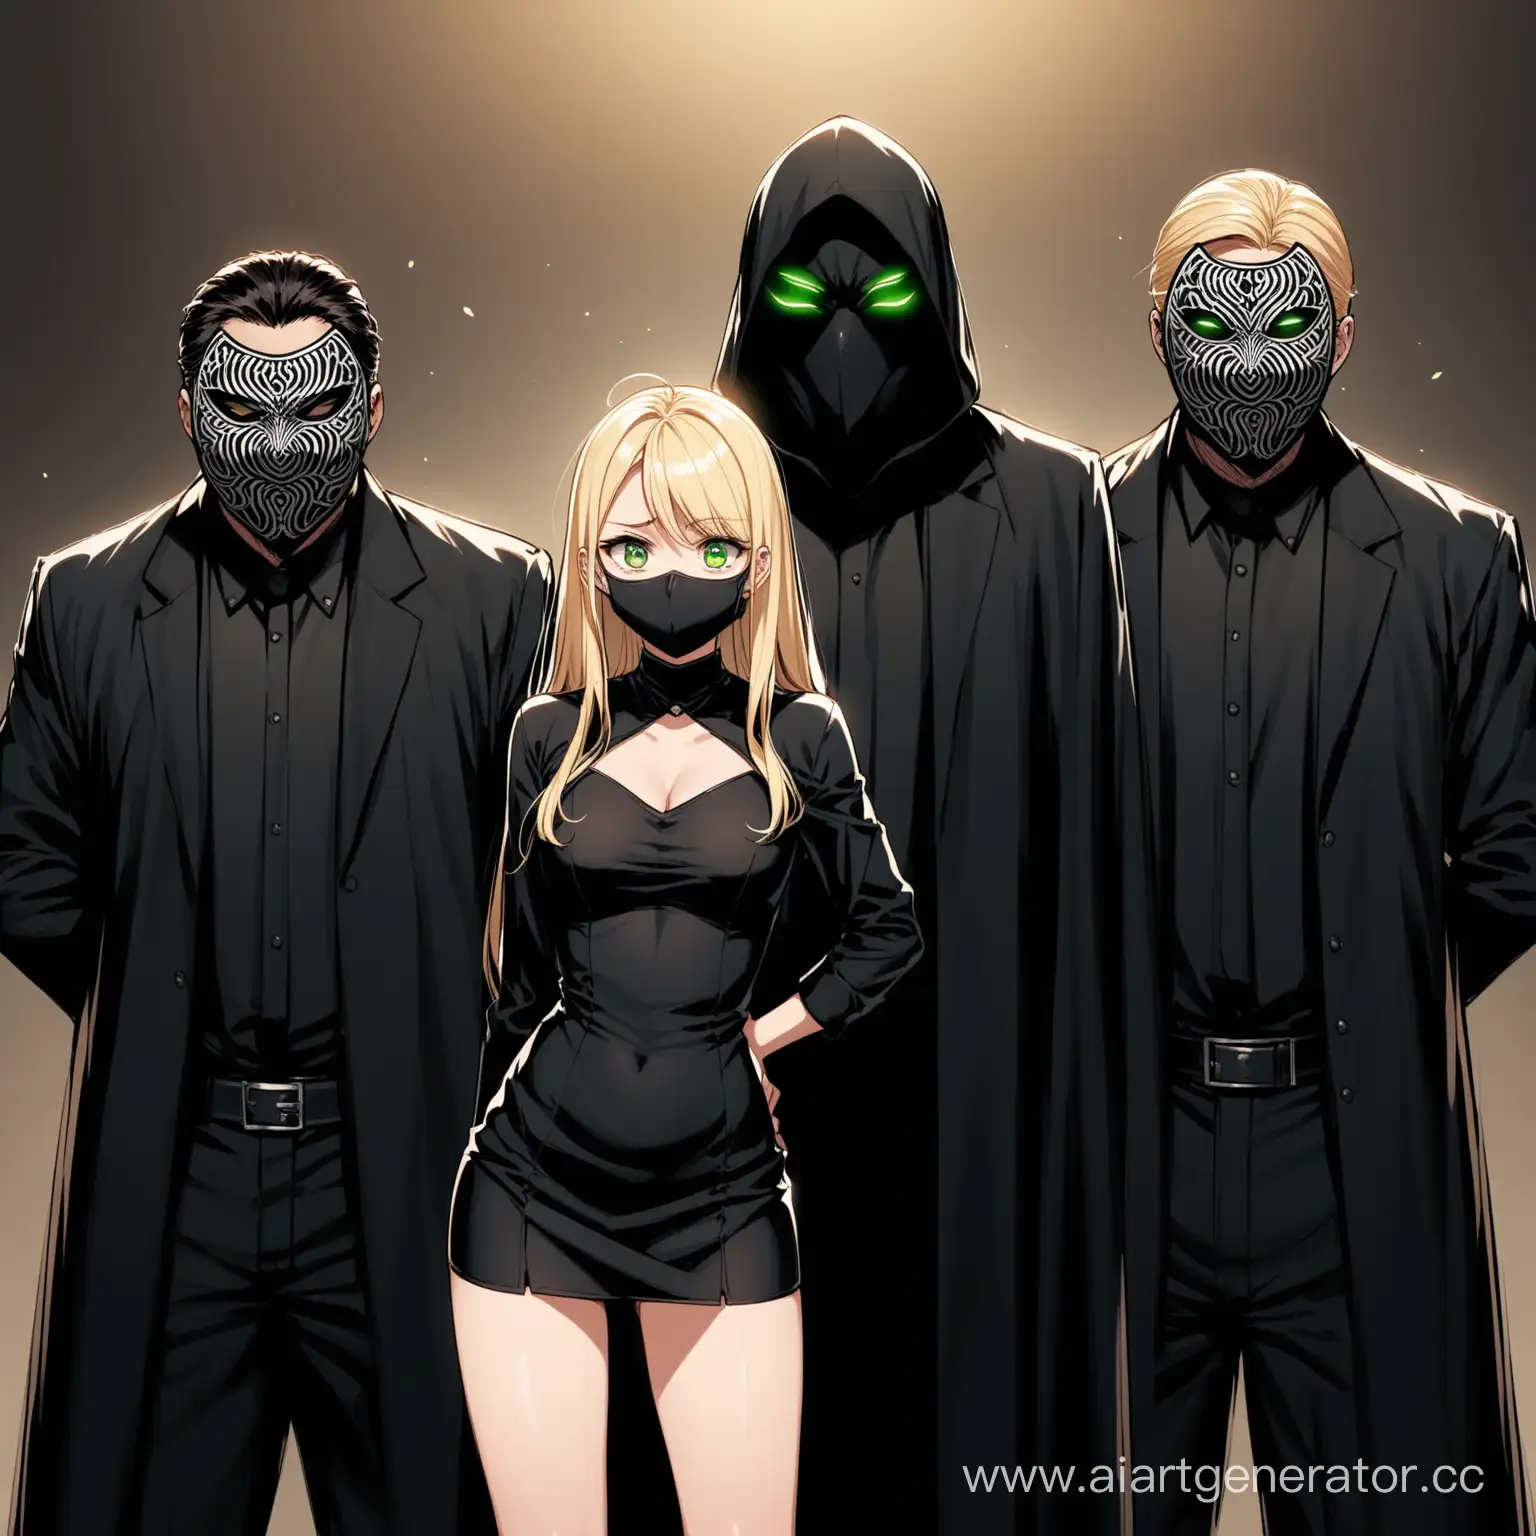 A short girl with long blond hair and green eyes, in a short dress, she looks scared and embarrassed standing next to 3 dangerous tall men in black clothes and masks